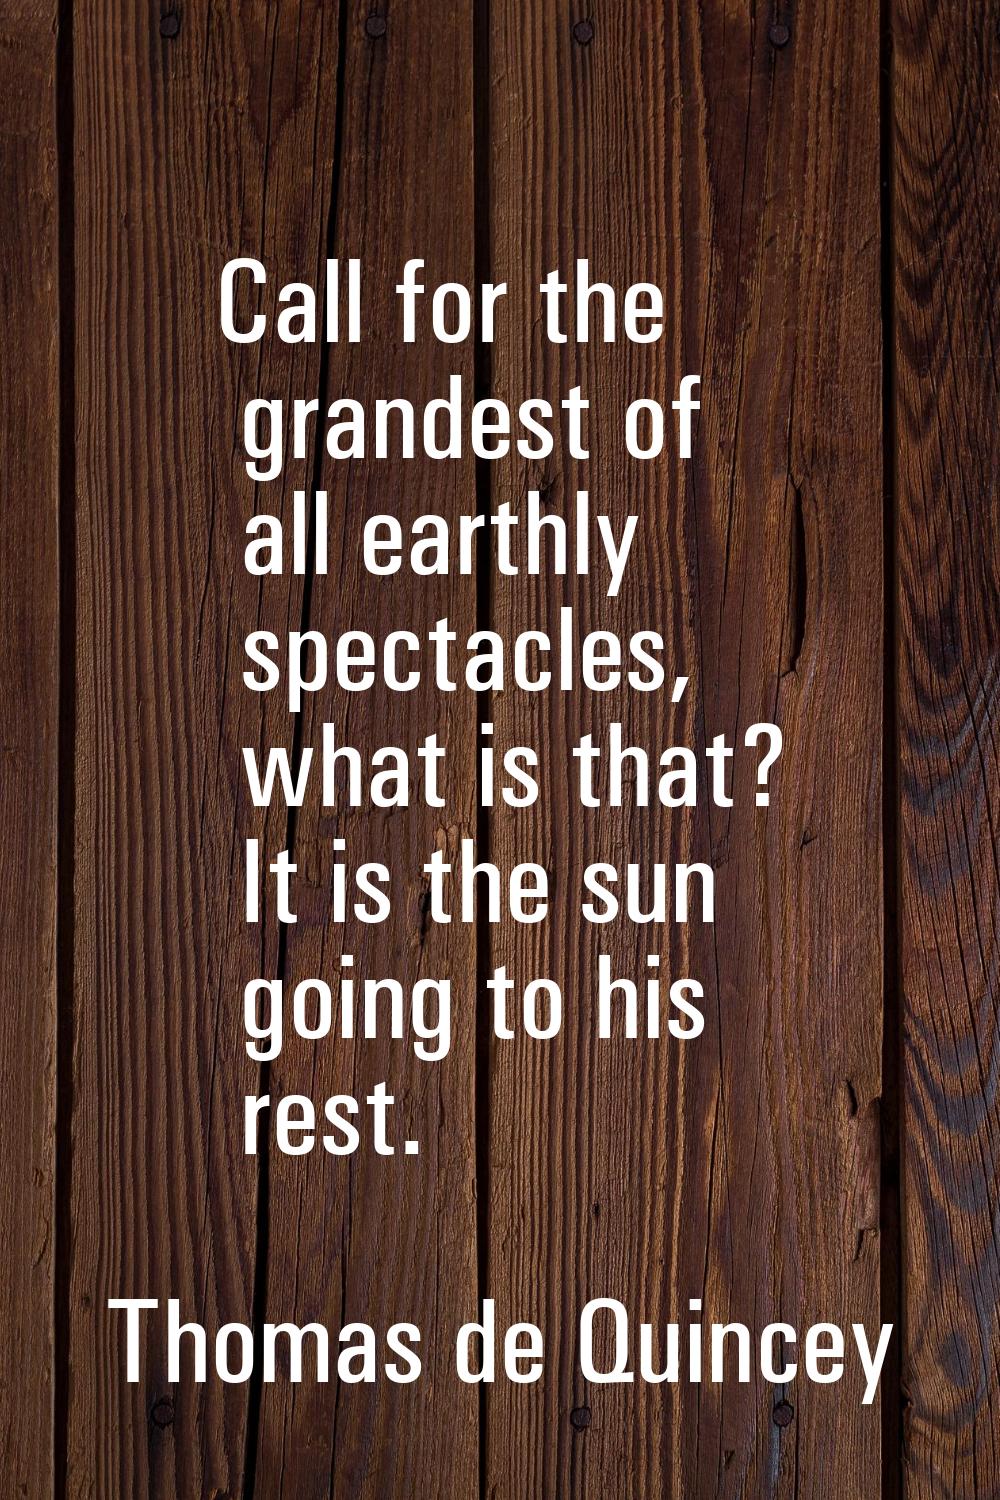 Call for the grandest of all earthly spectacles, what is that? It is the sun going to his rest.